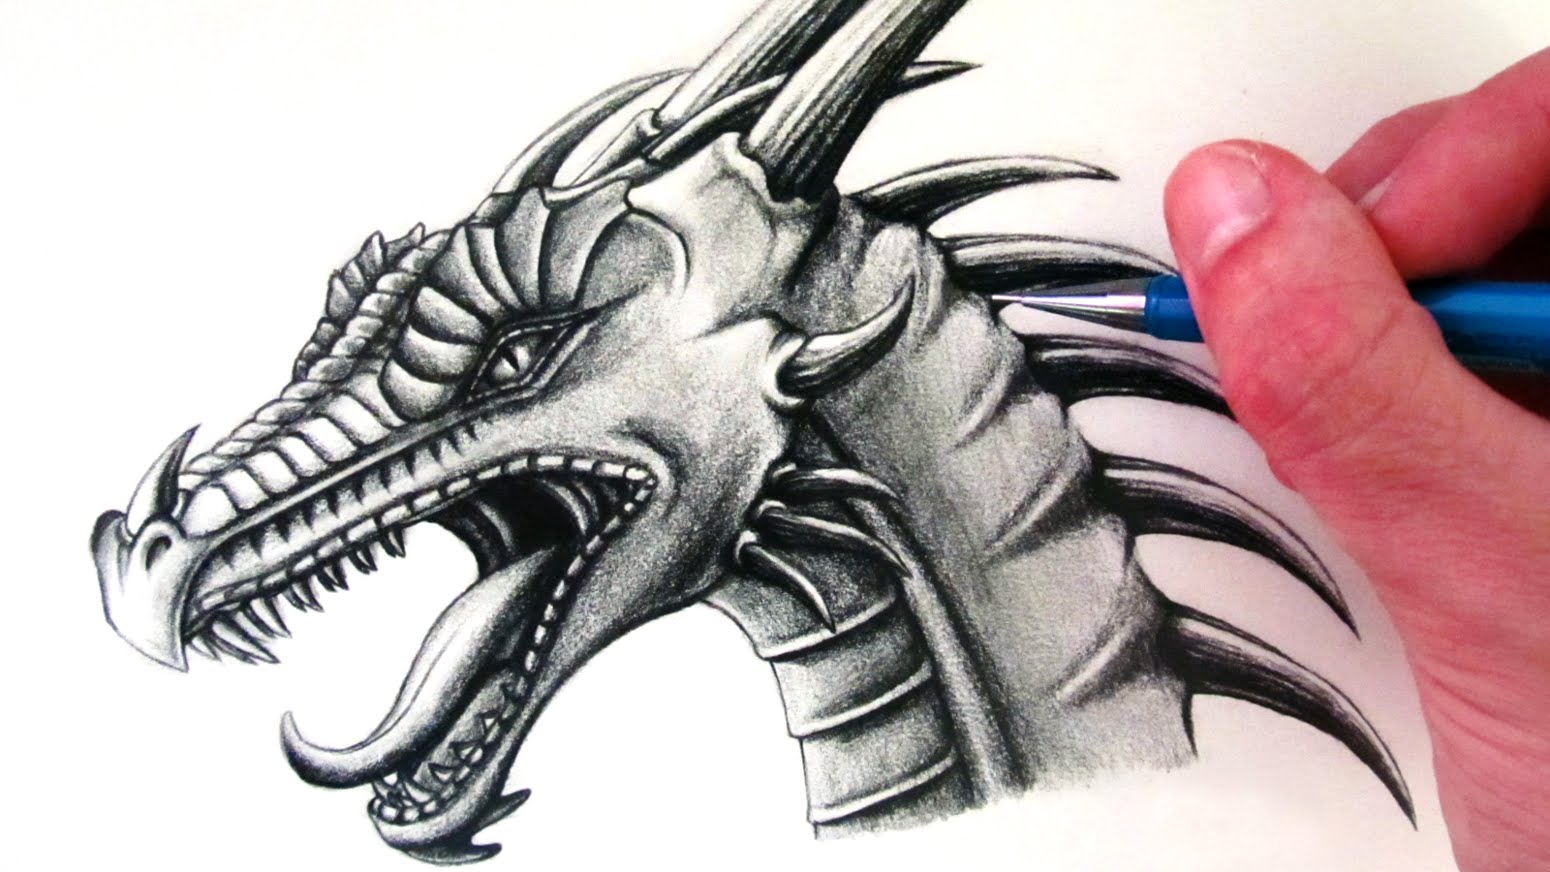 Free Dragon Drawings, Download Free Dragon Drawings png images, Free  ClipArts on Clipart Library